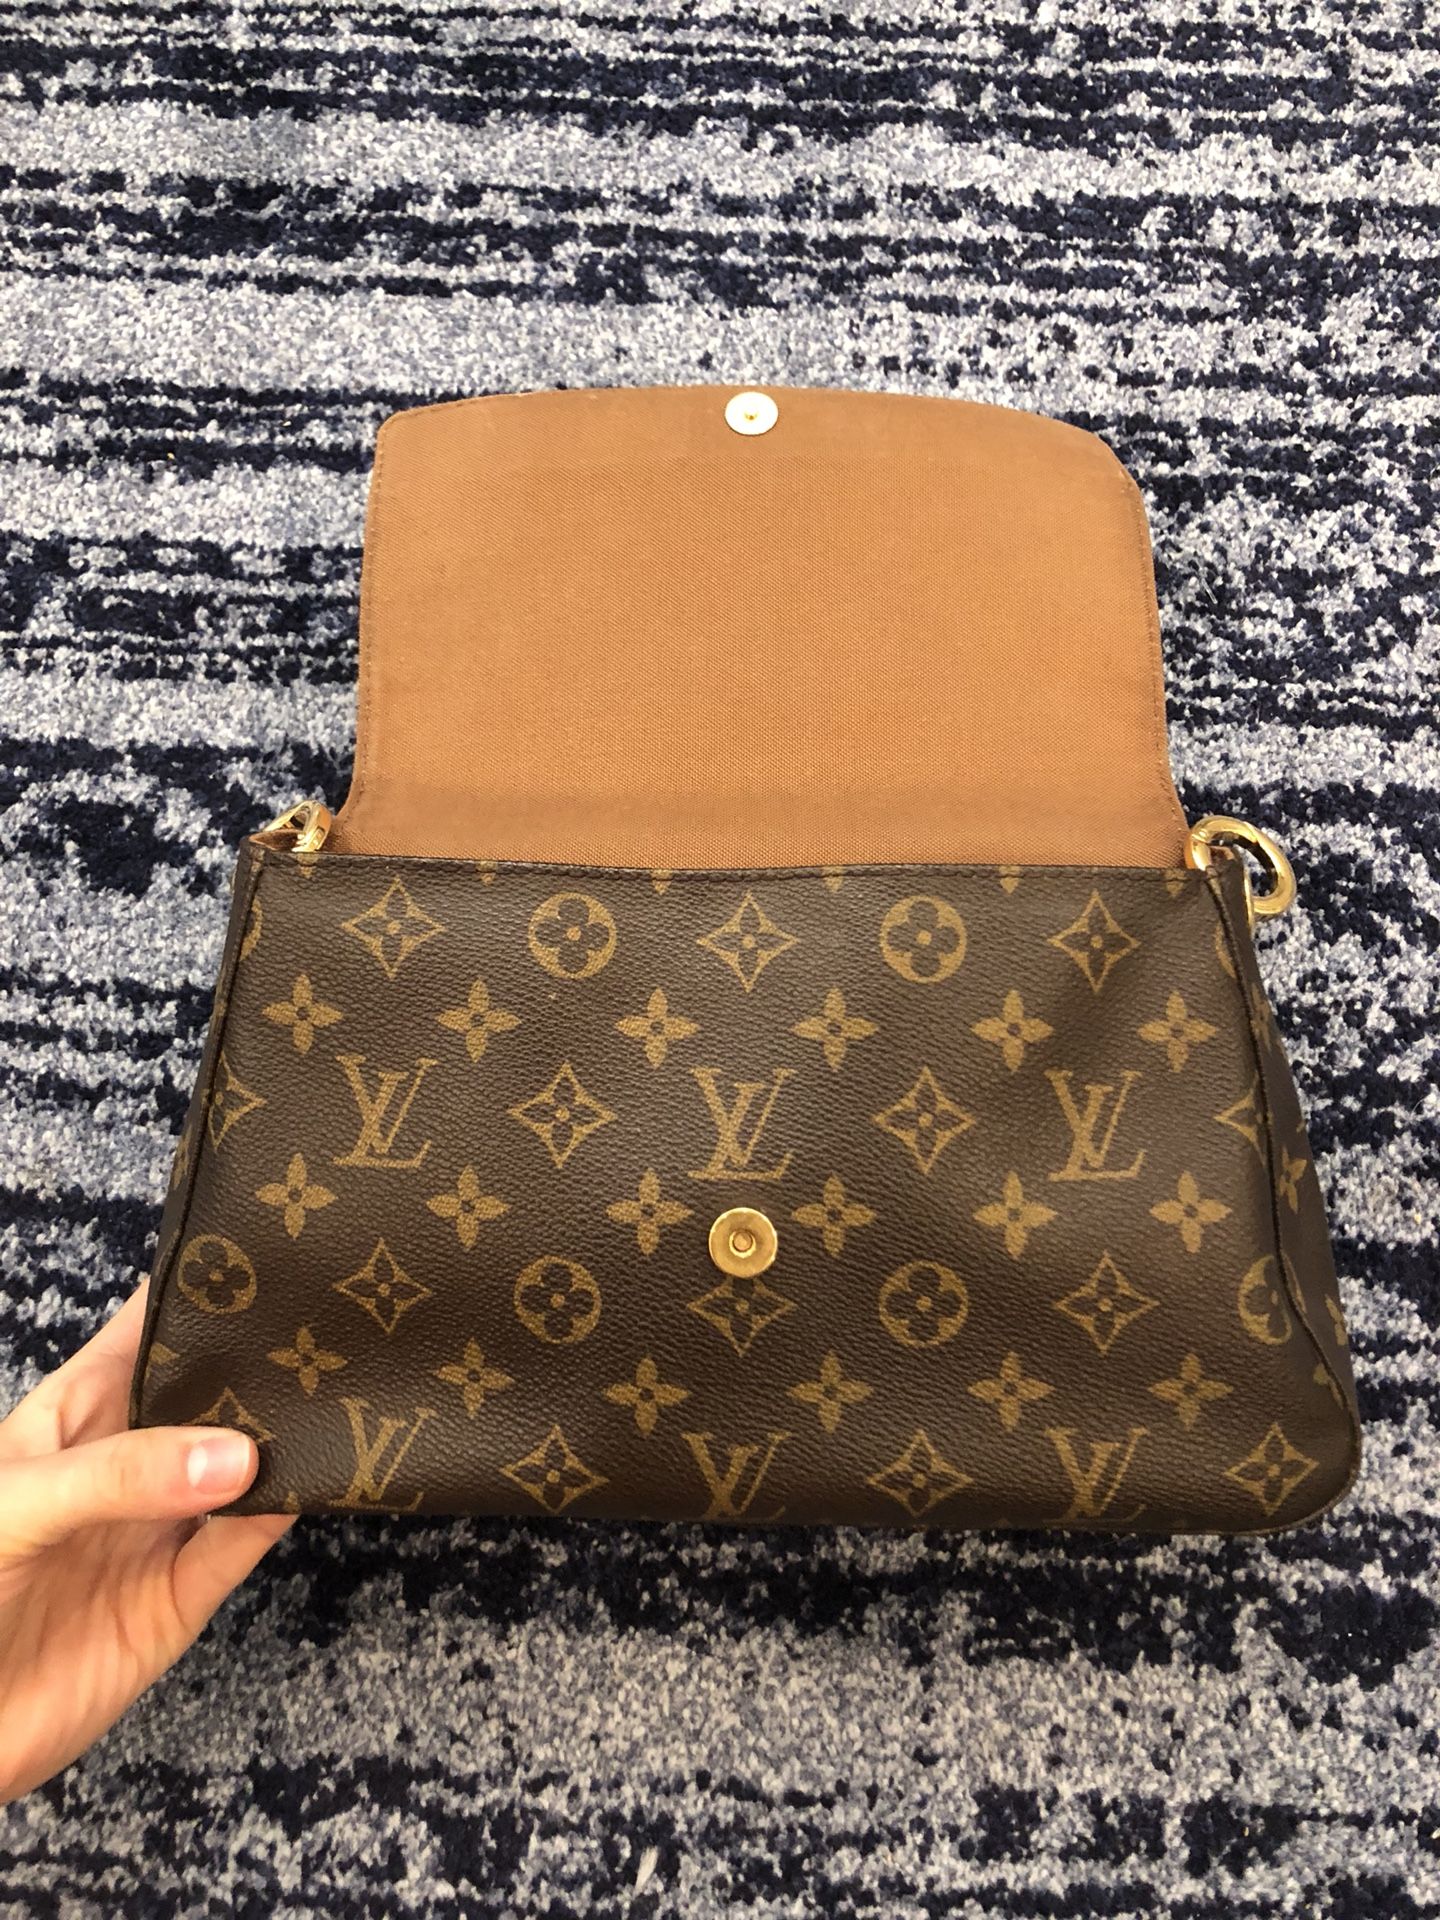 Louis Vuitton Mini Dauphine Bags for Sale in Sterling, VA - OfferUp